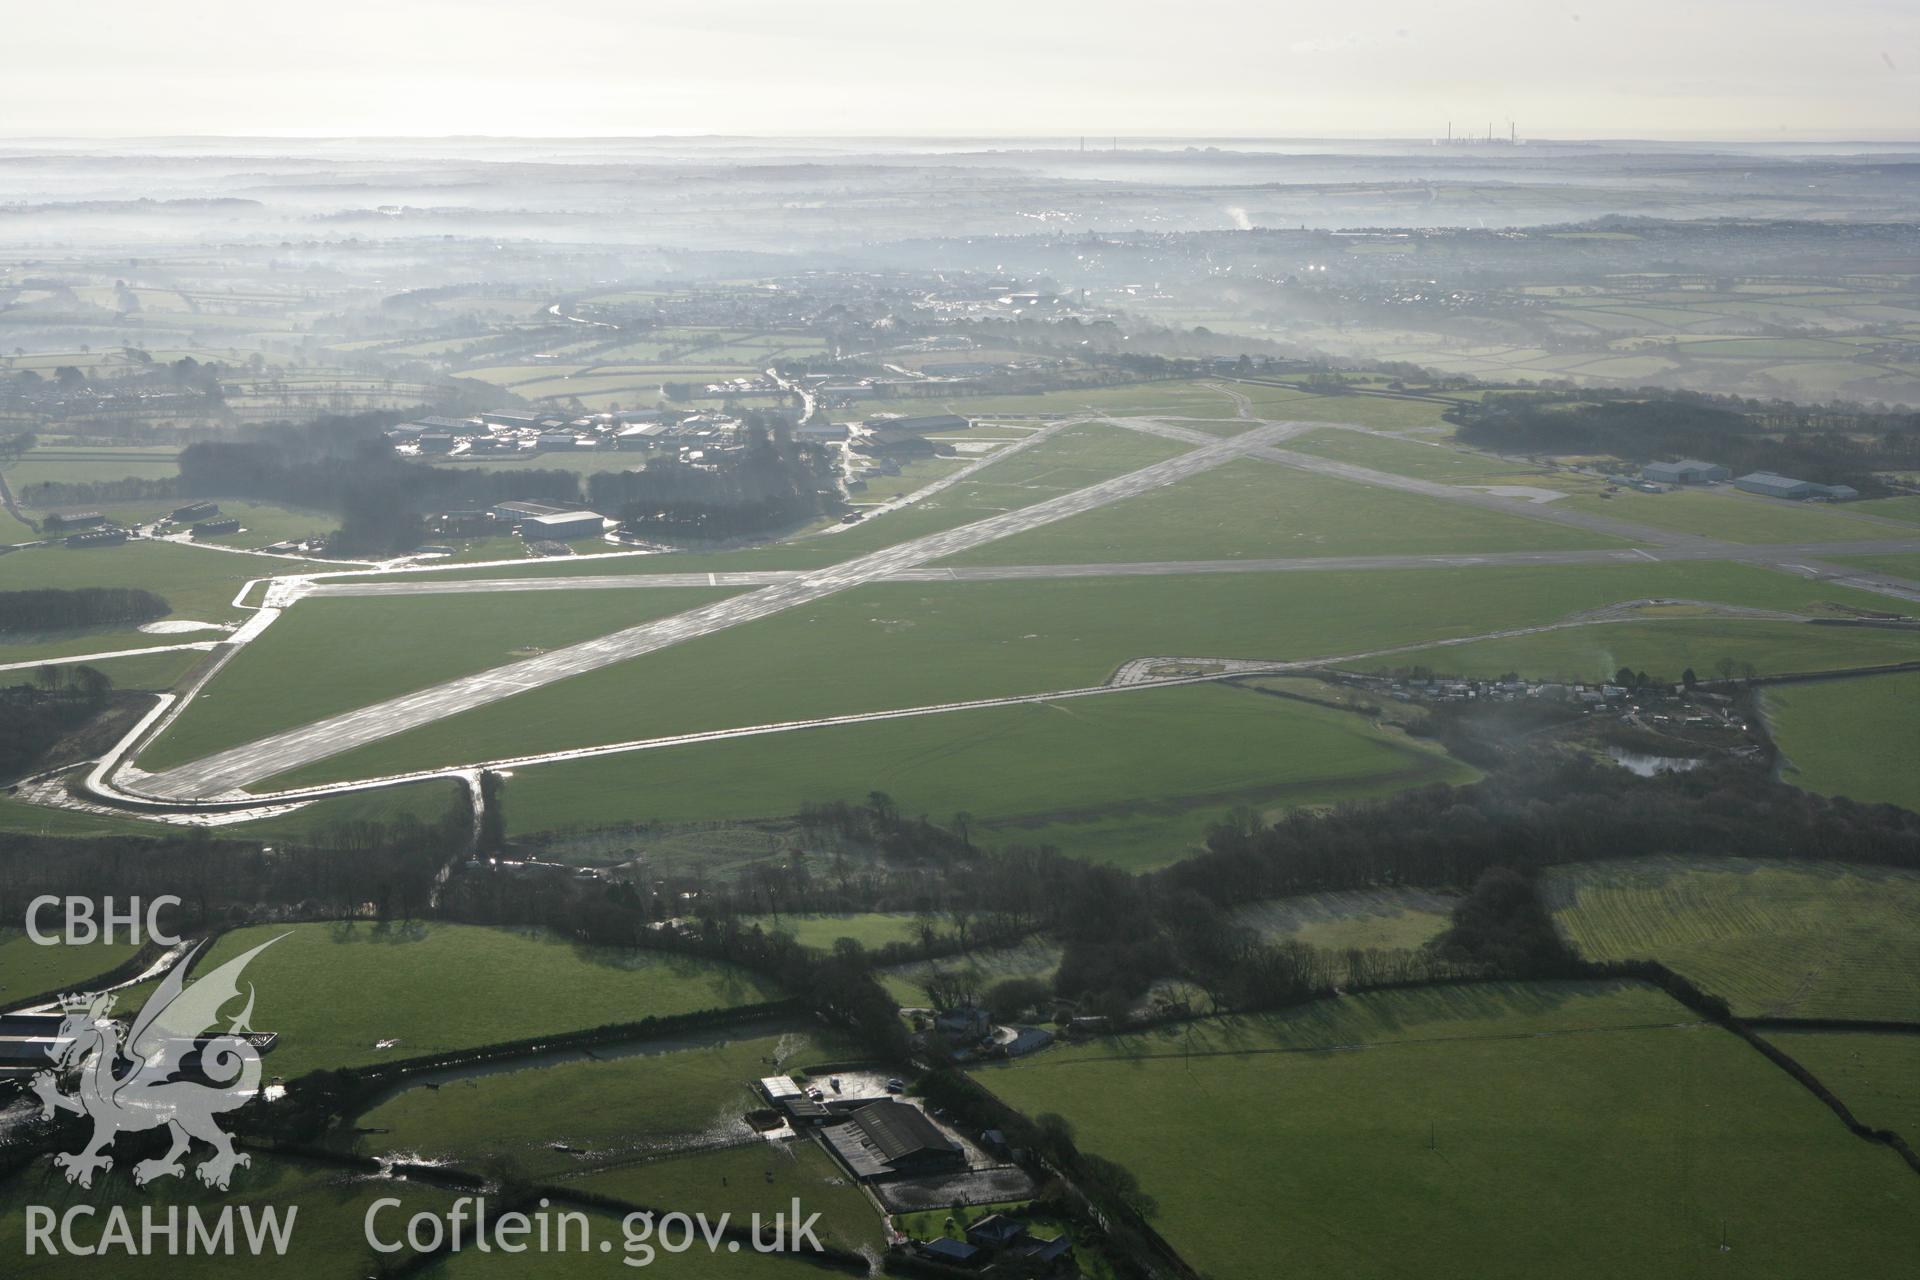 RCAHMW colour oblique photograph of Haverfordwest Airfield (Withybush Airfield). Taken by Toby Driver on 15/12/2008.